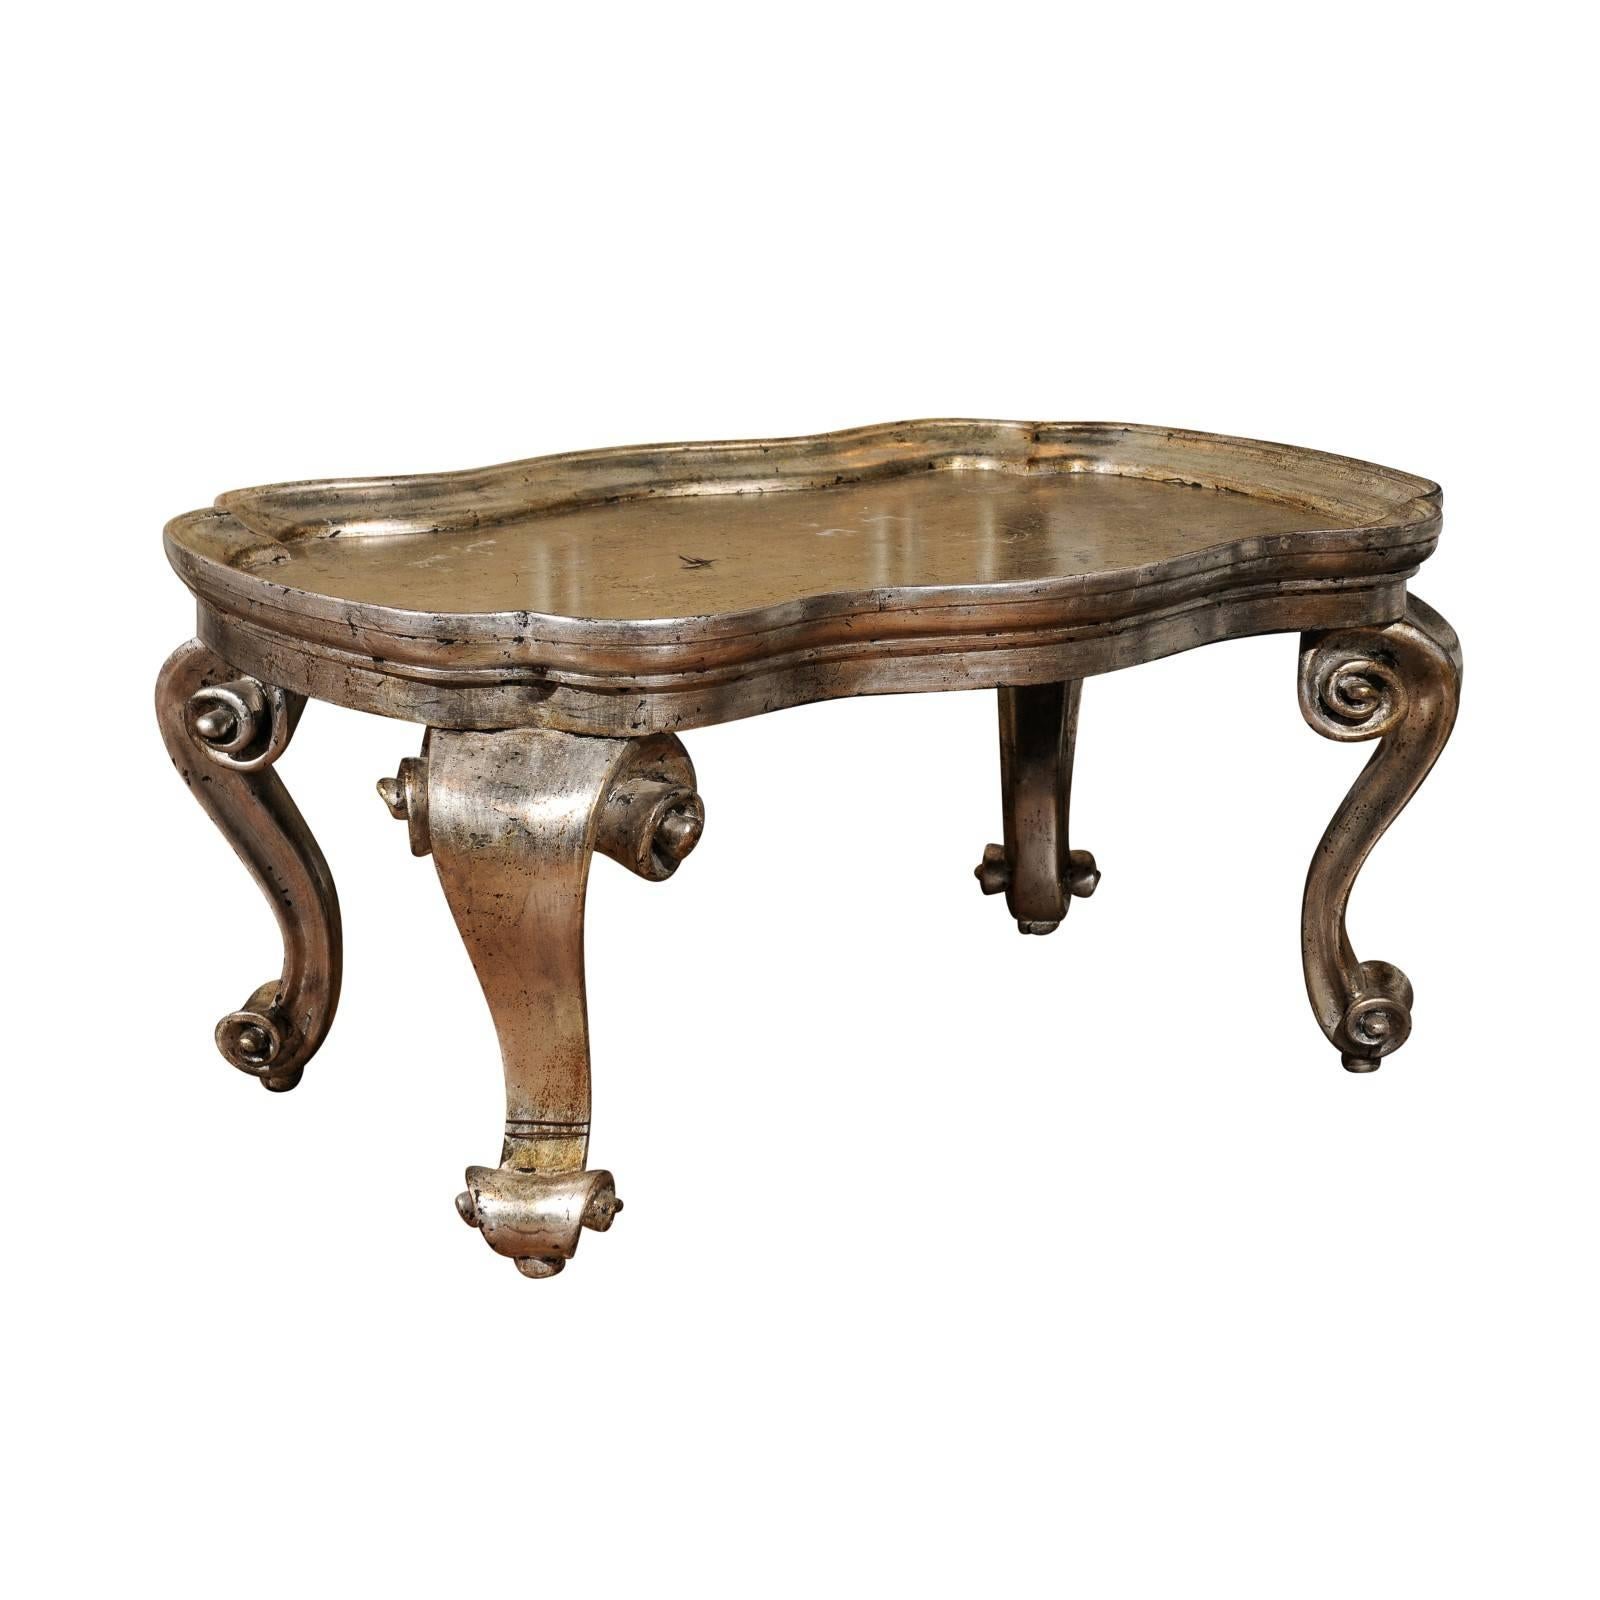 Vintage Italian Rococo Style Silver Leaf Painted Coffee Table from the 1950s For Sale